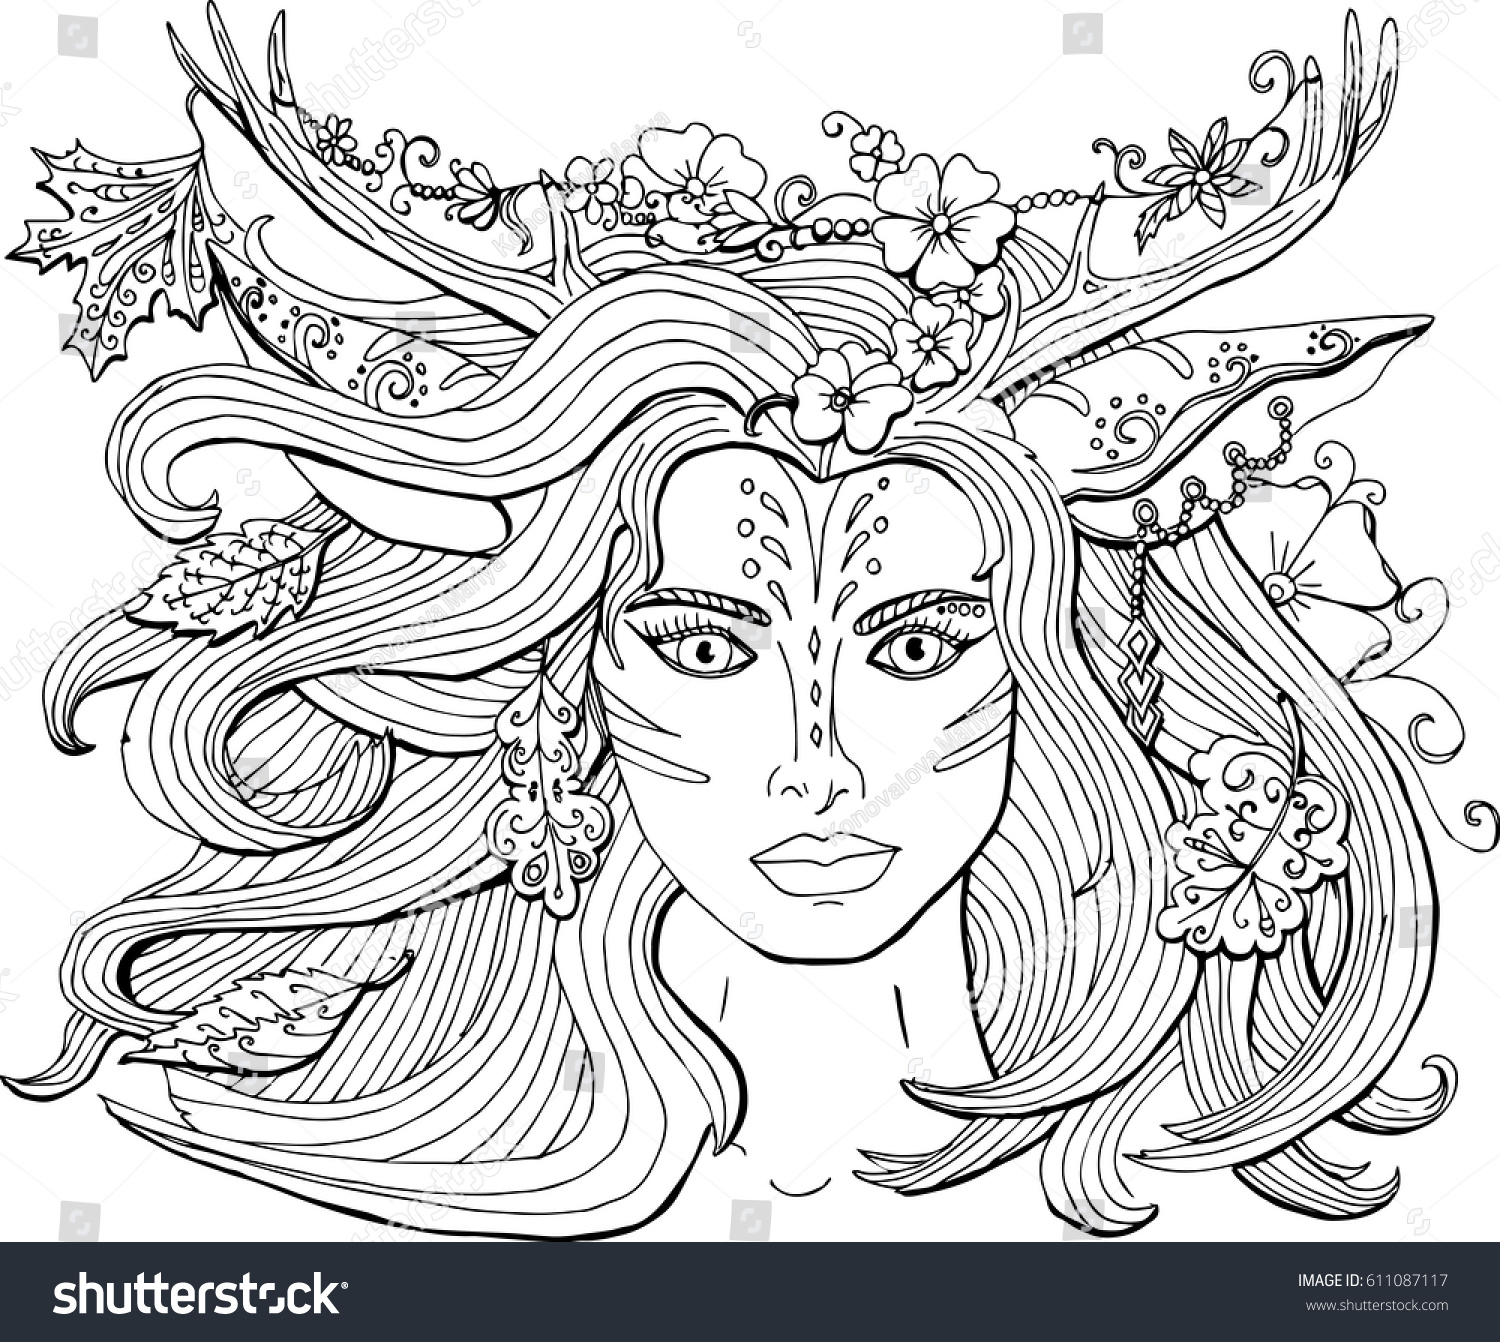 Vector coloring pages for adults ornament beautiful fantasy girl deer with antlers The spirit of